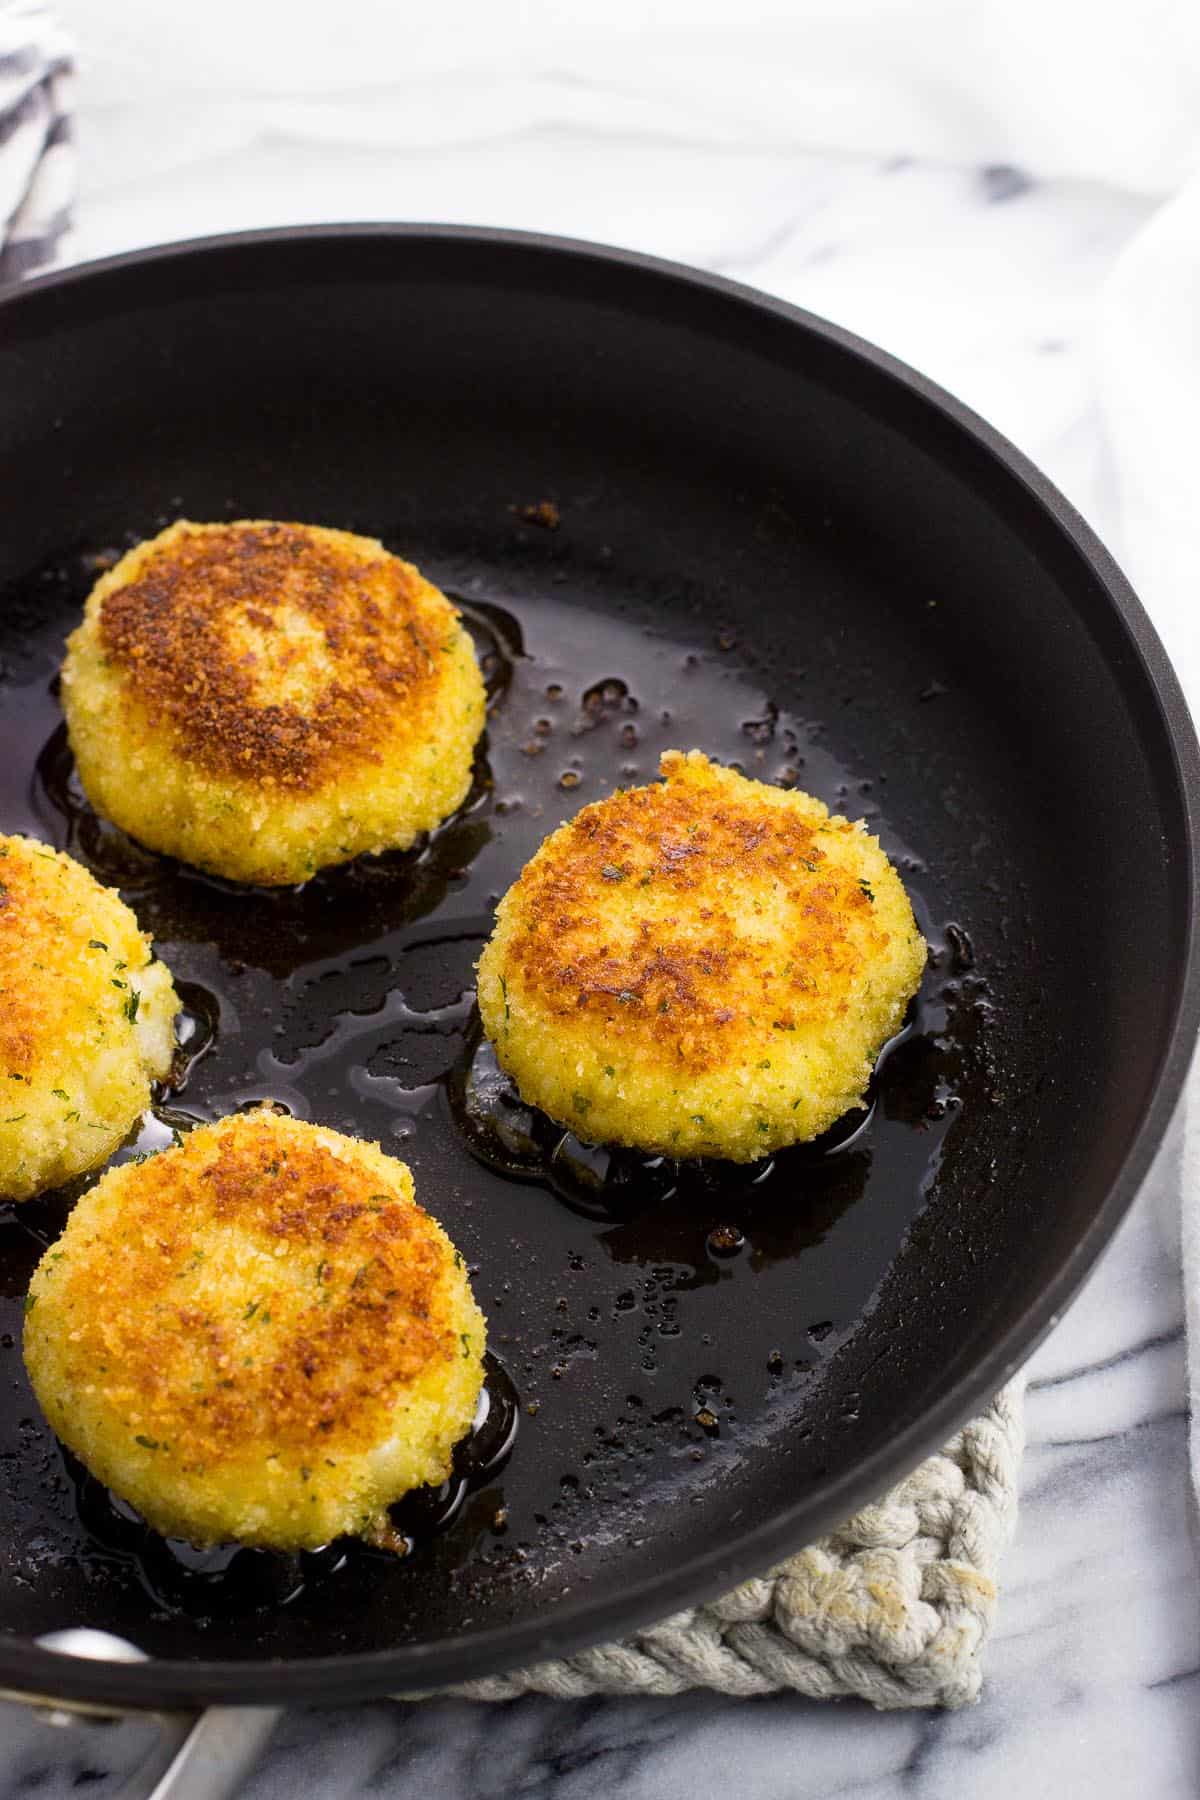 Four pan-fried risotto cakes in a skillet.